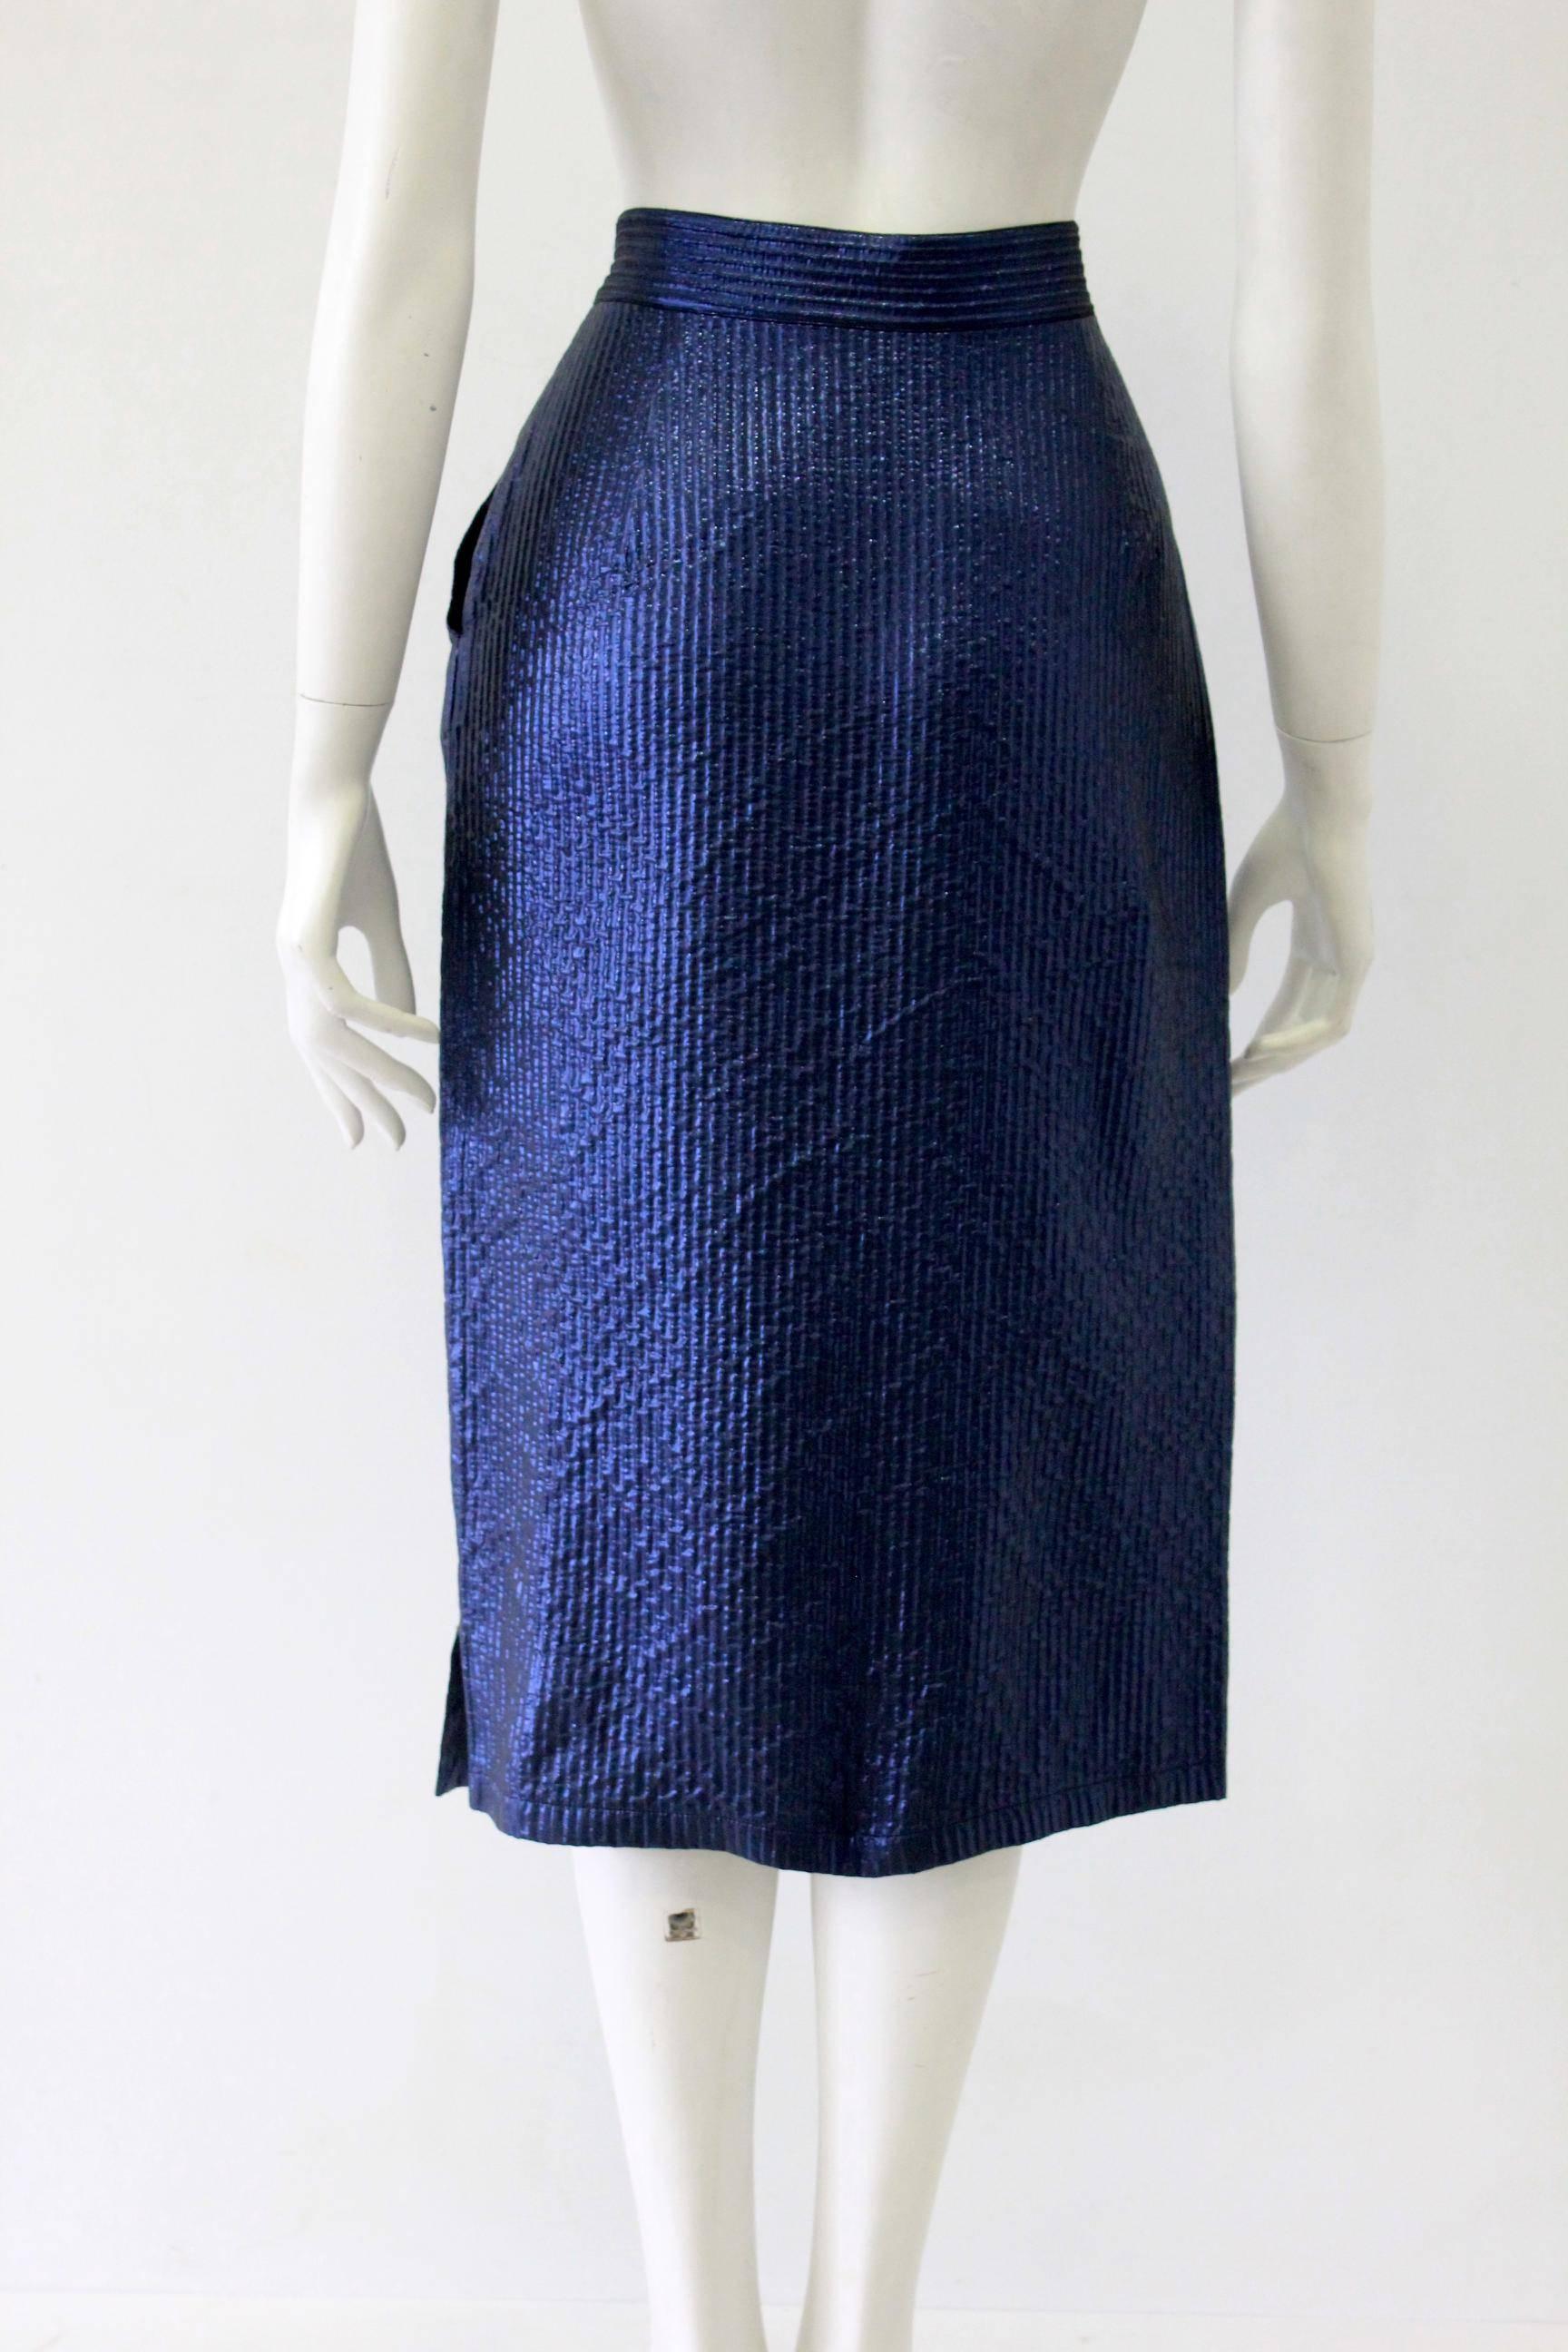 Early Gianni Versace Lurex Skirt In New Condition For Sale In Athens, Agia Paraskevi